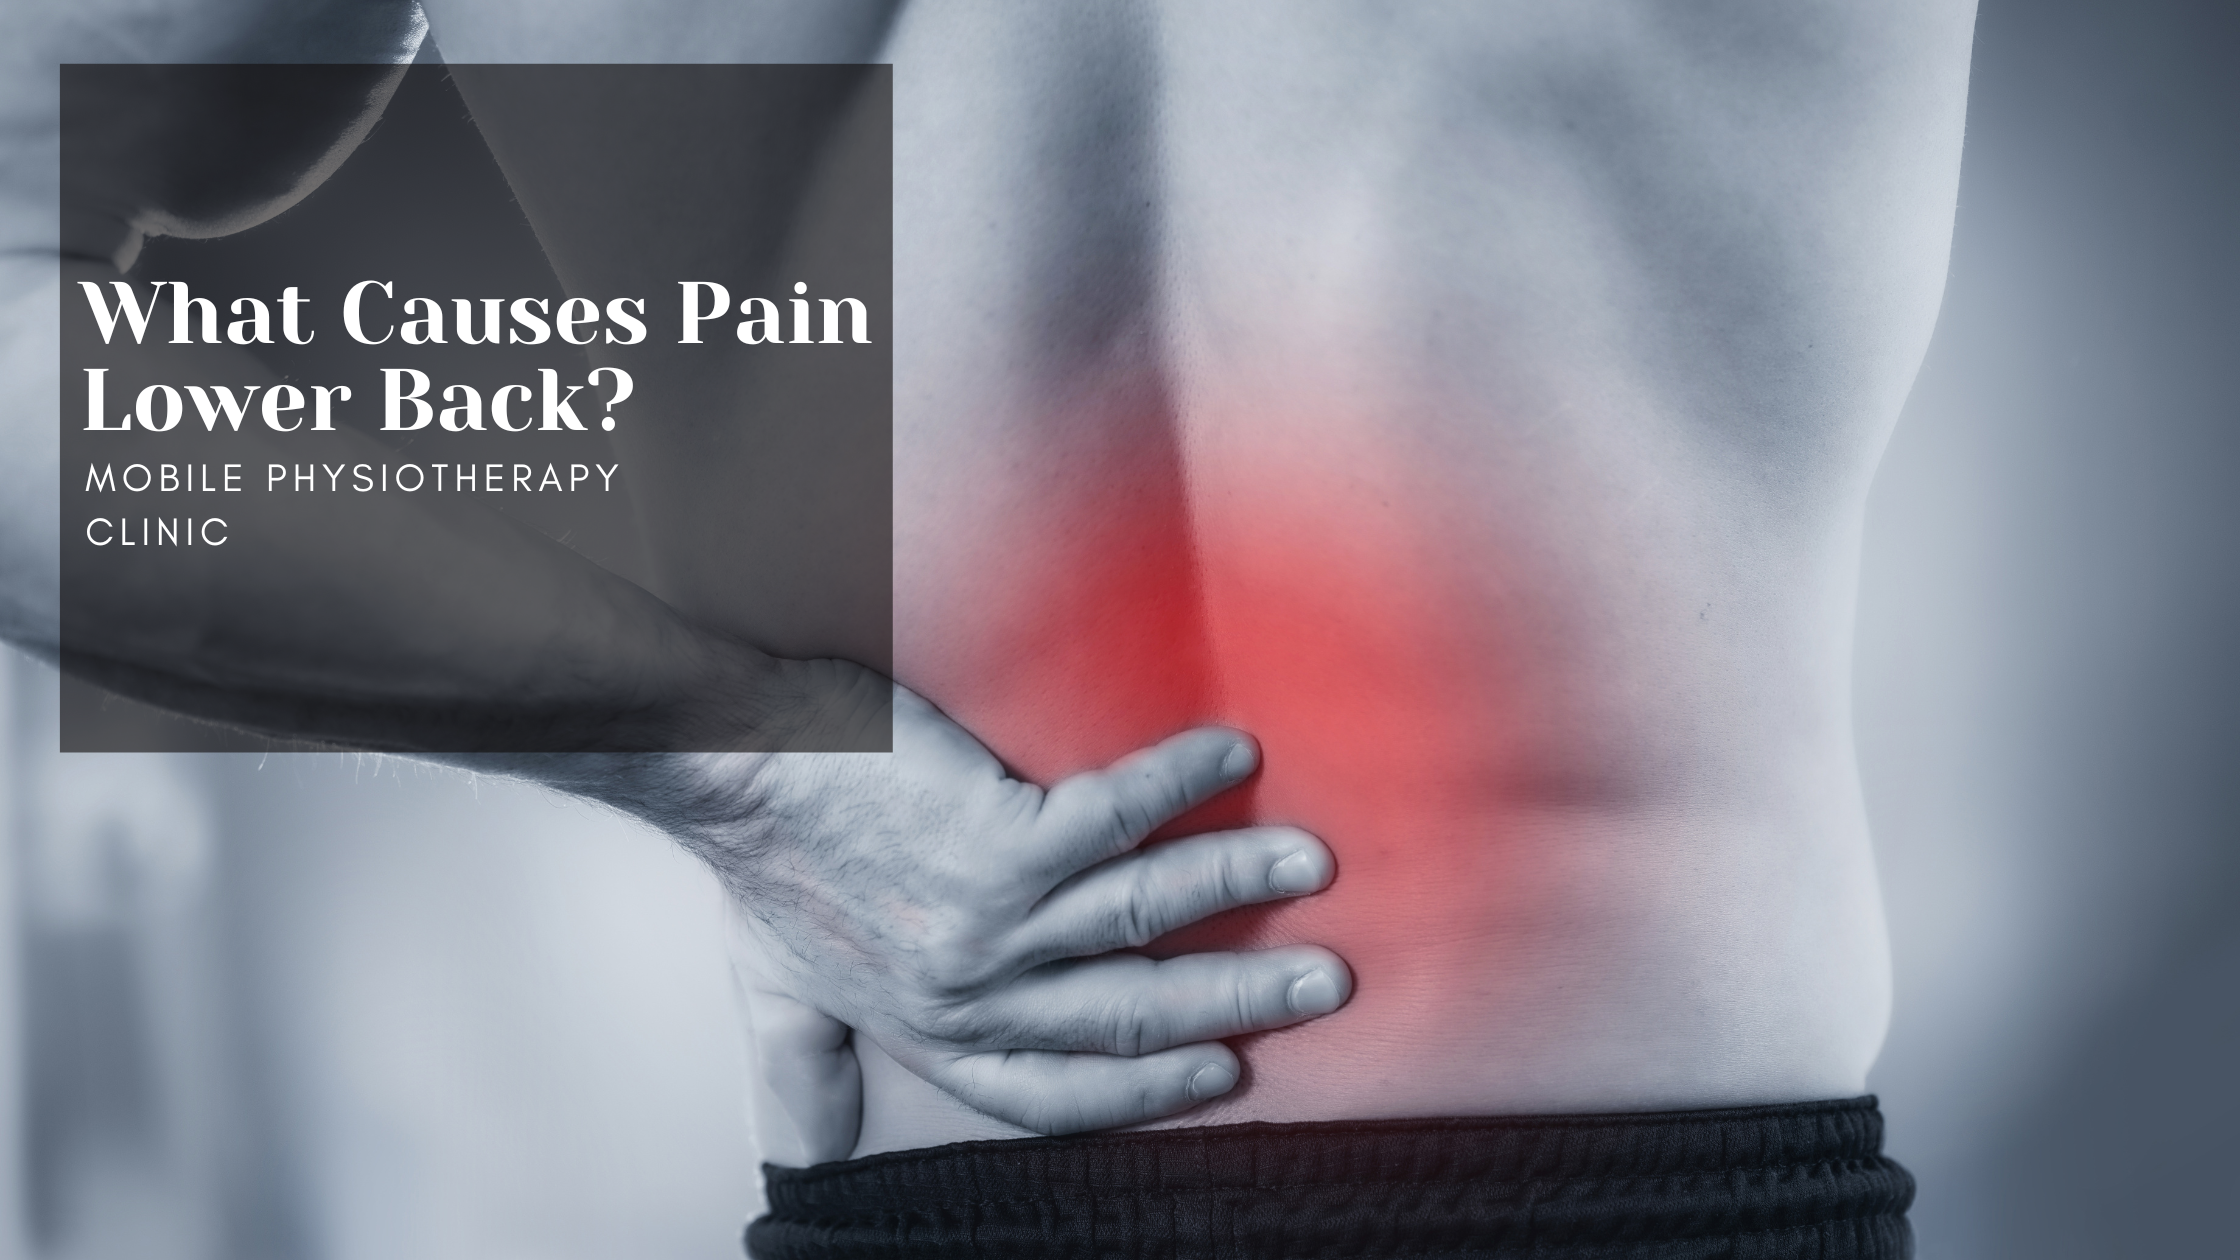 What Causes Pain Lower Back